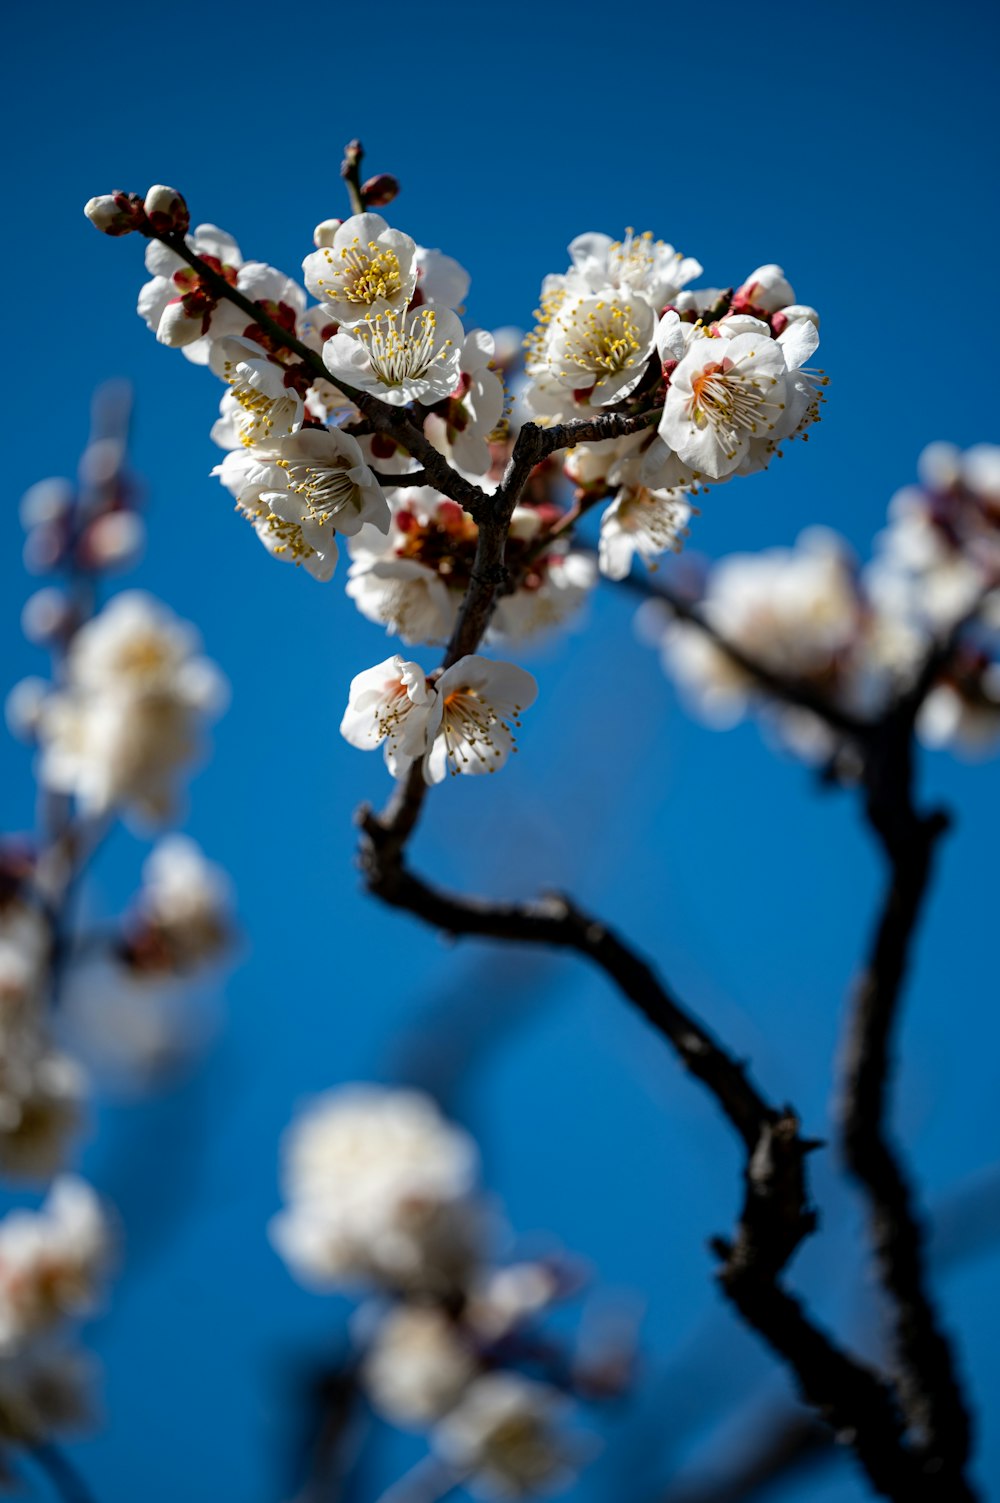 a branch with white flowers against a blue sky